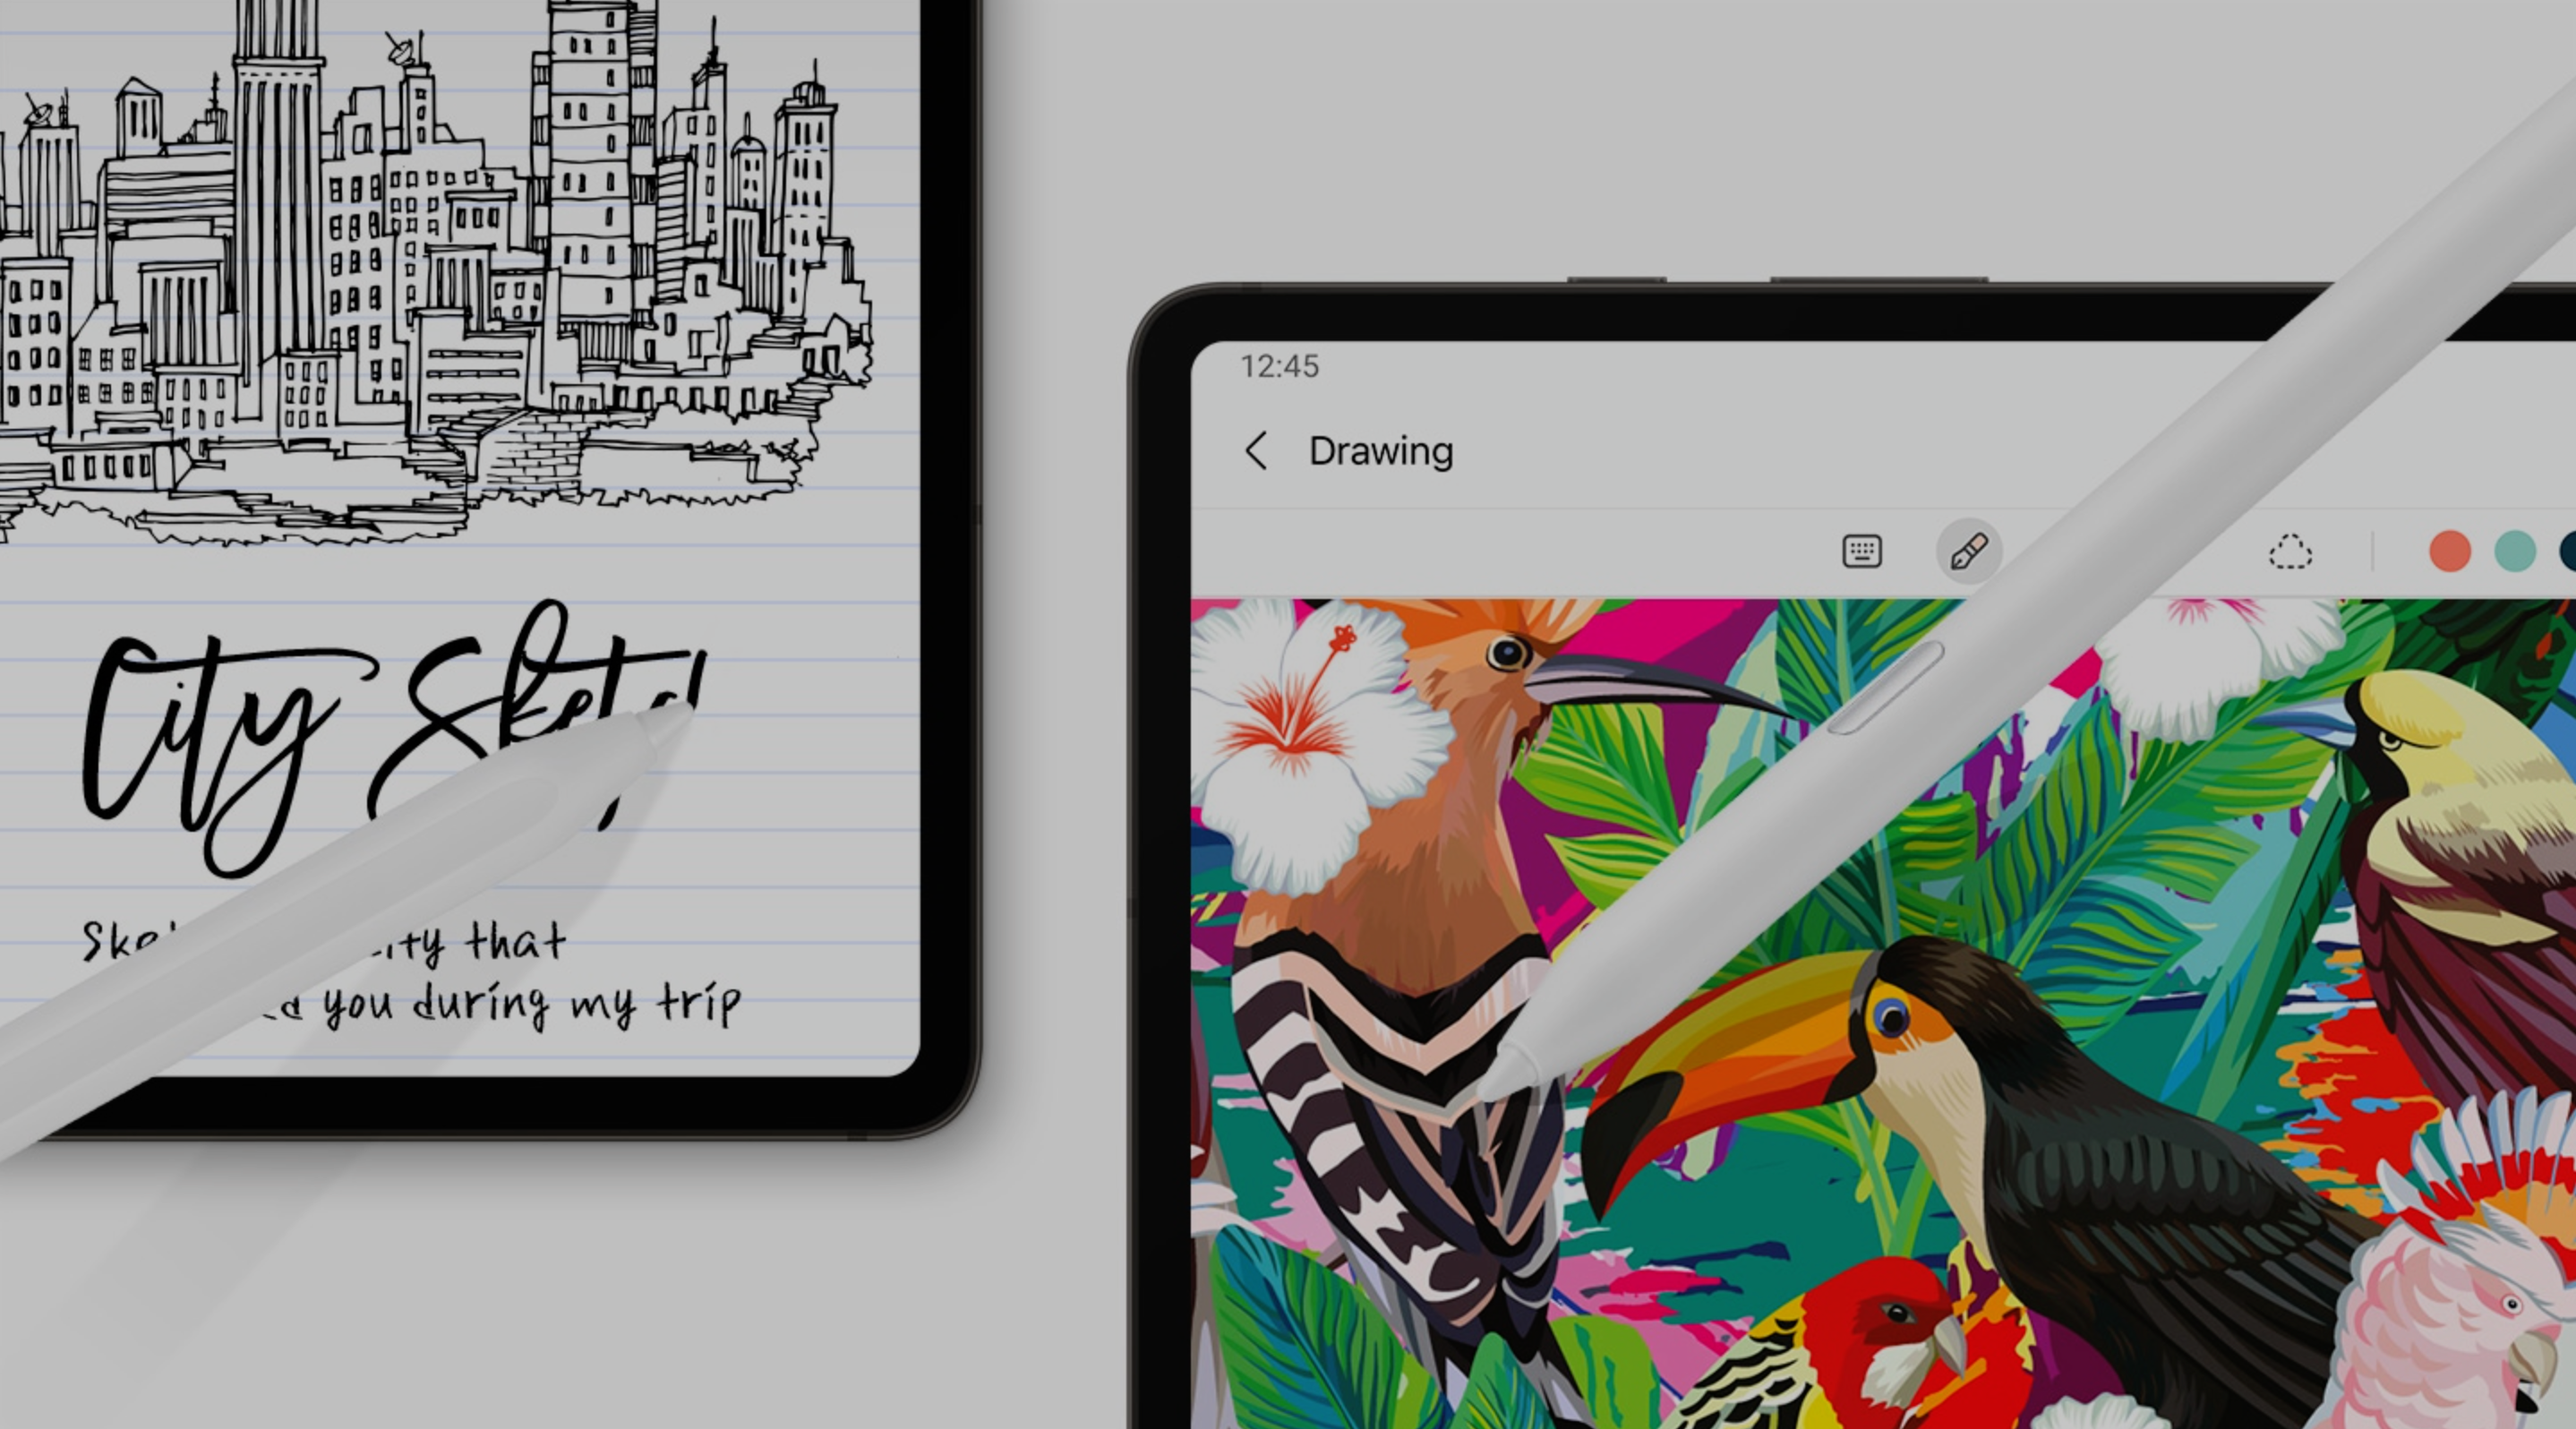 Two Galaxy S Pen Creator Edition stylii shown sketching and inking on a tablet